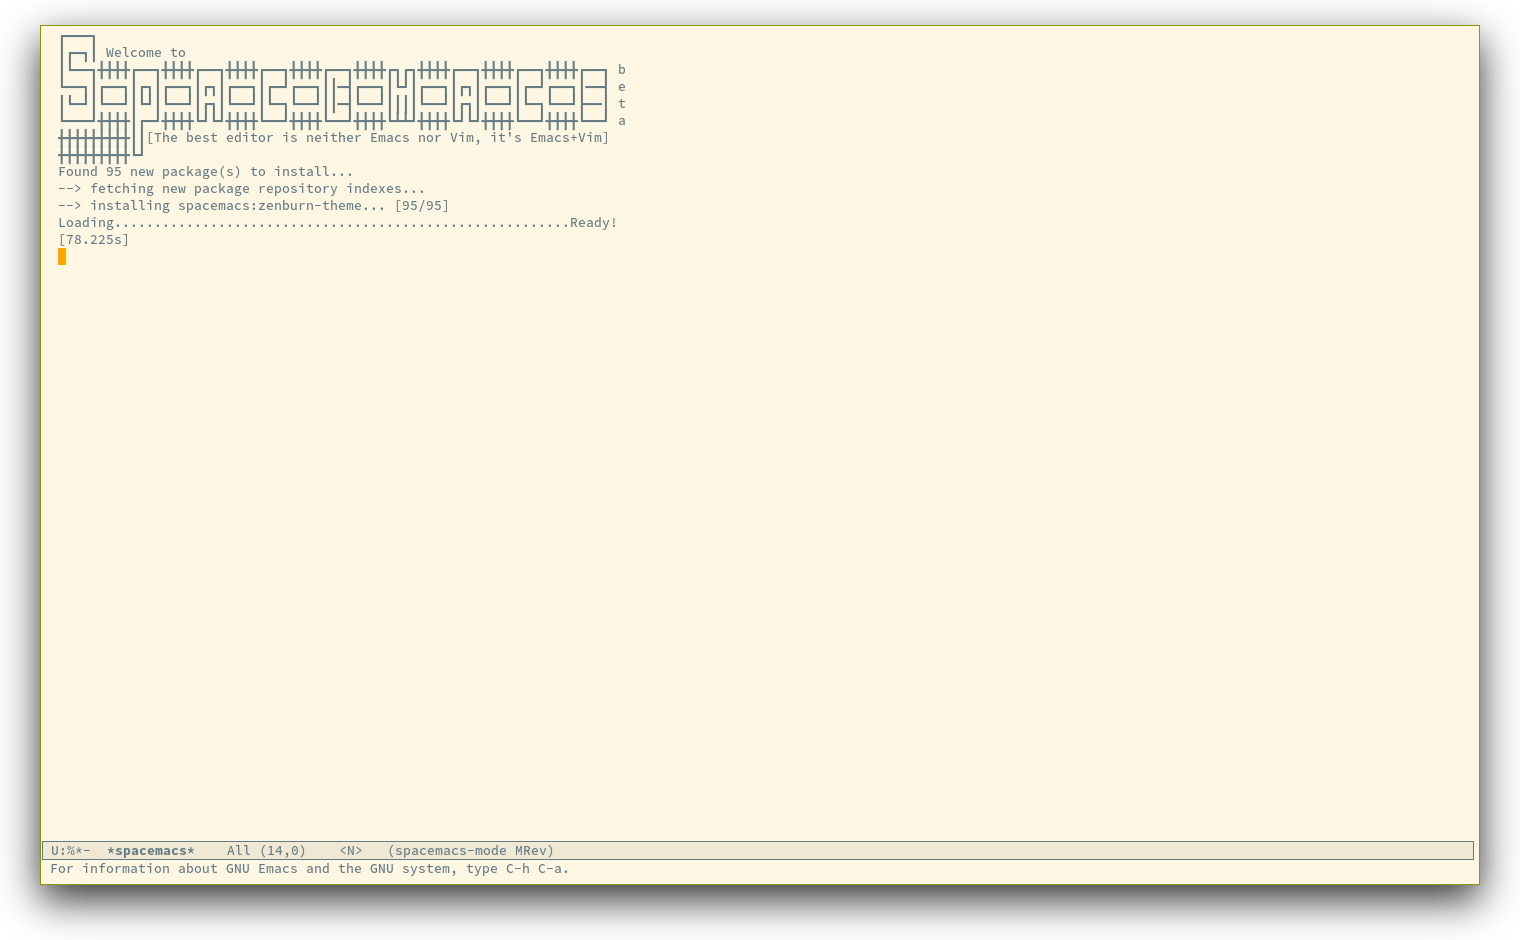 /TakeV/spacemacs/media/commit/3de3133ed0526f239714774834668cac1fba2629/doc/img/spacemacs-startup.png